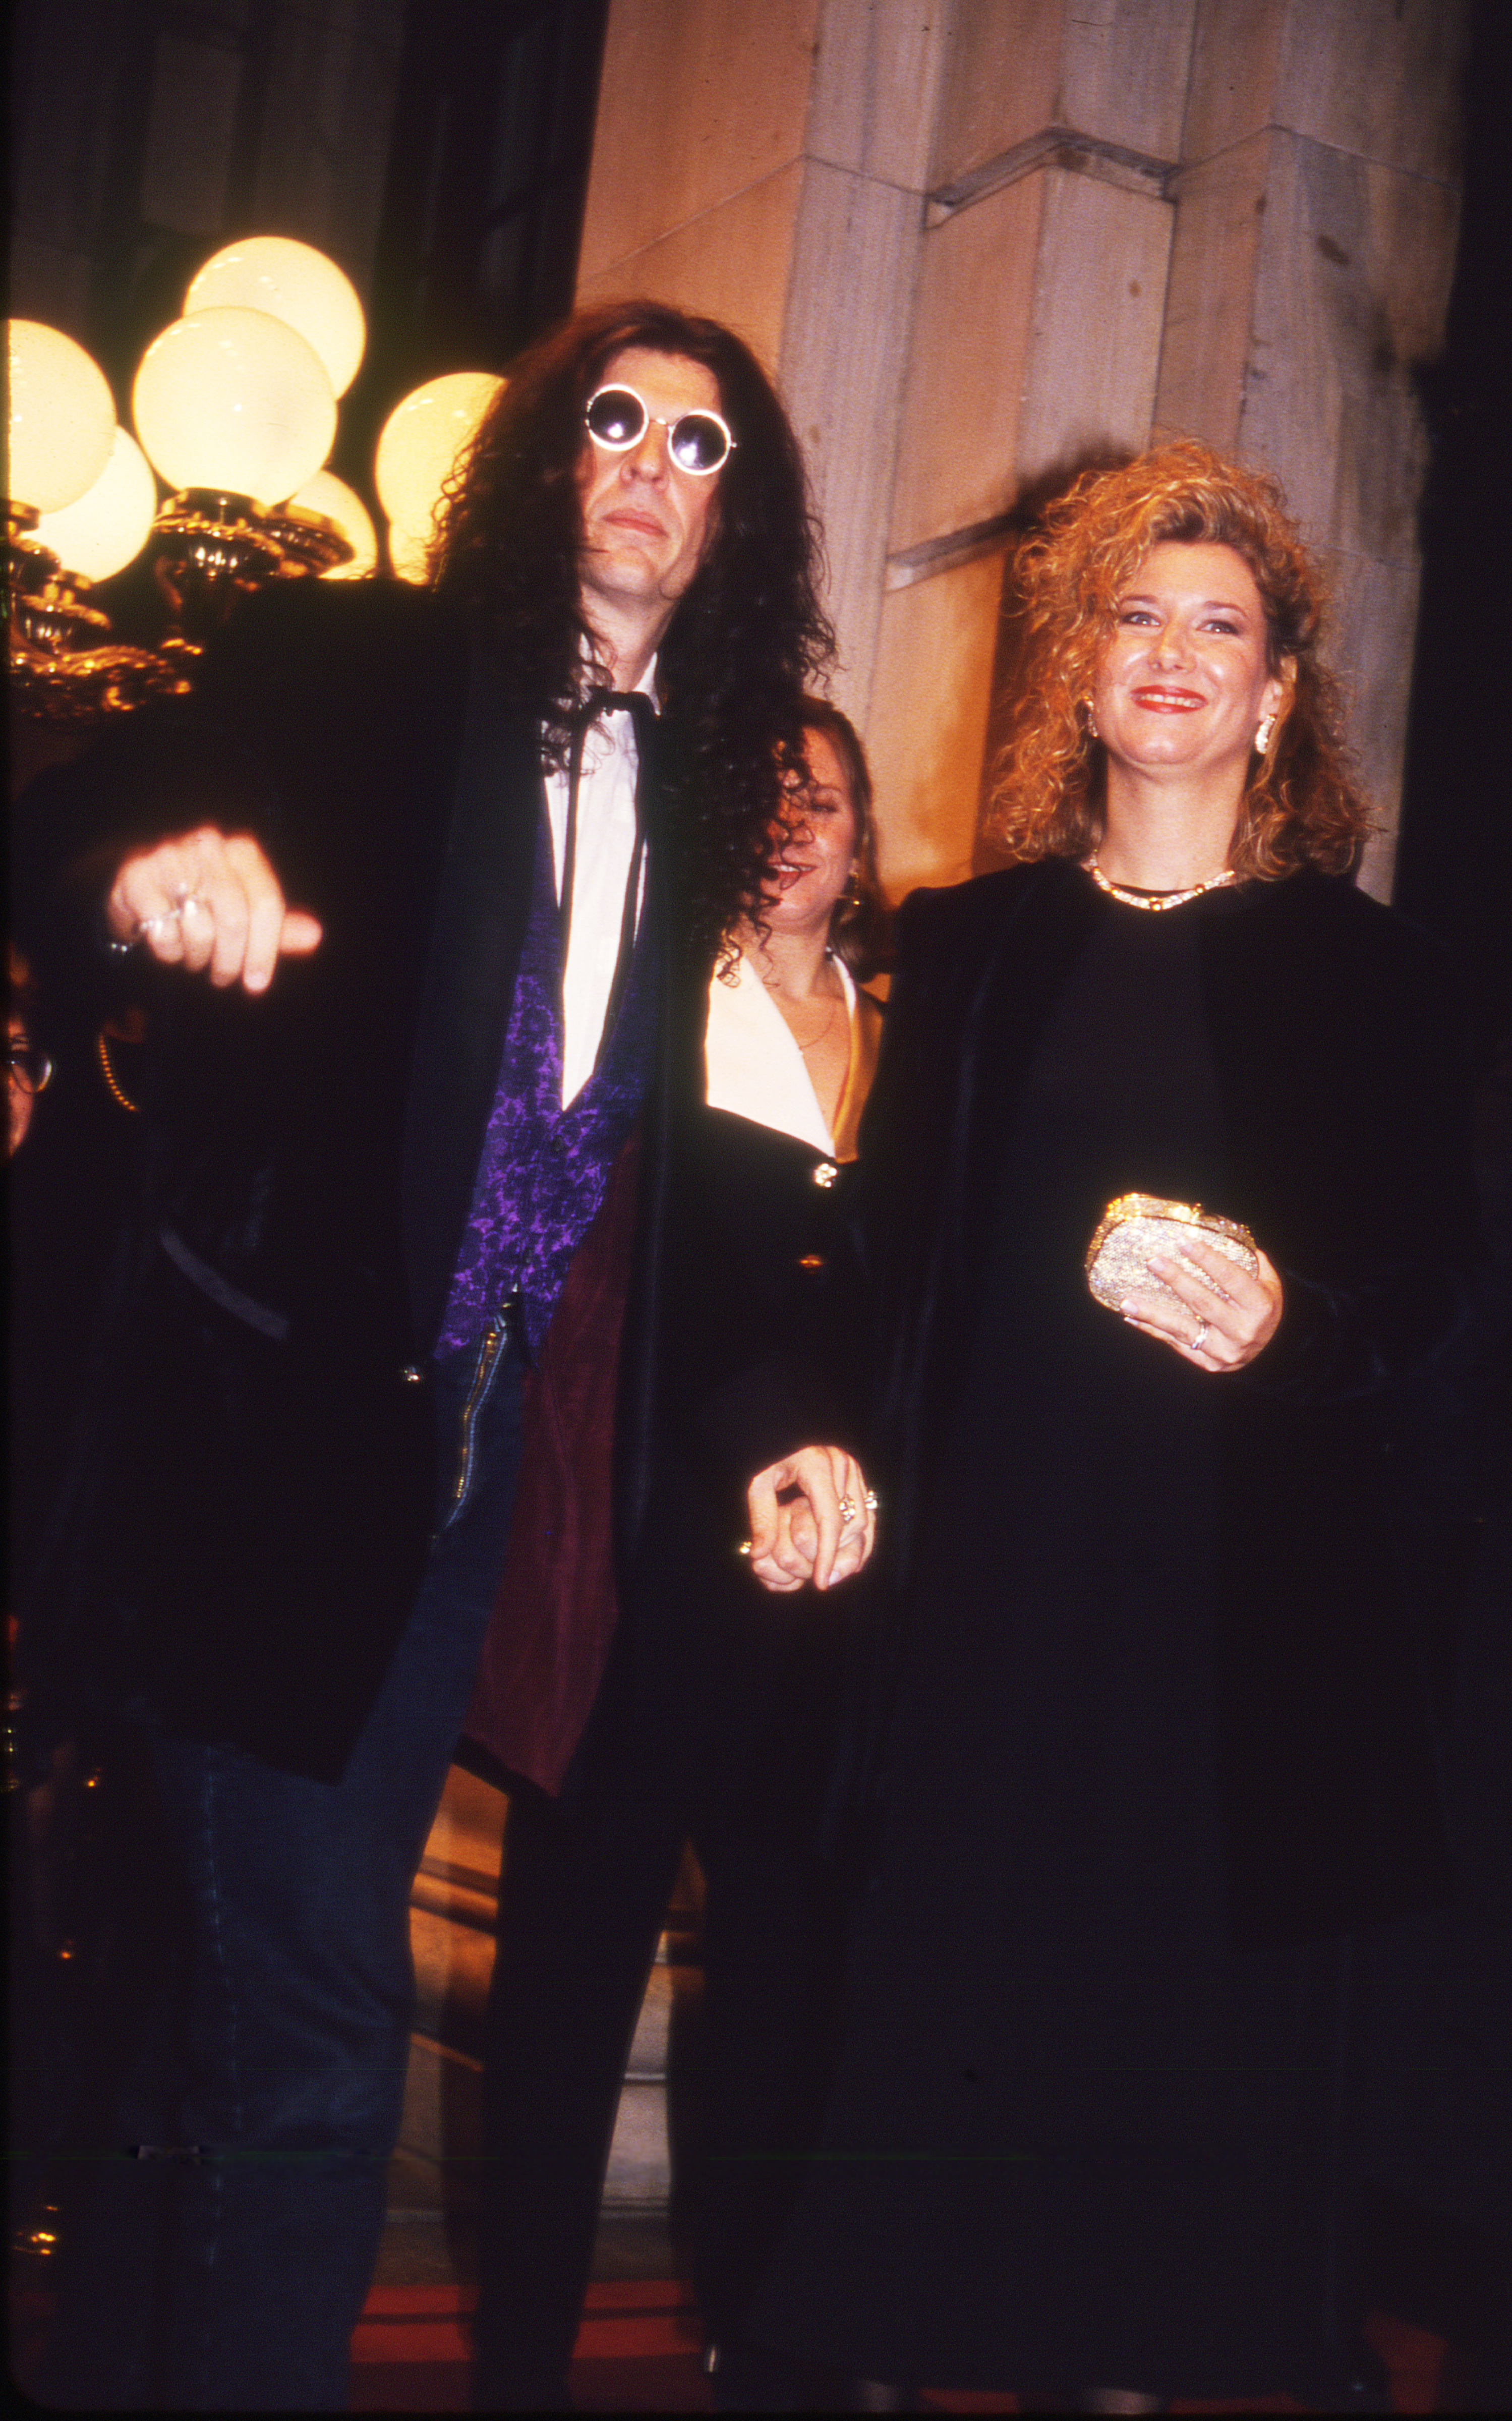 Howard and Alison Stern at the wedding of Marla Maples and Donald Trump held at the Plaza Hotel in New York on December 20, 1993 | Source: Getty Images